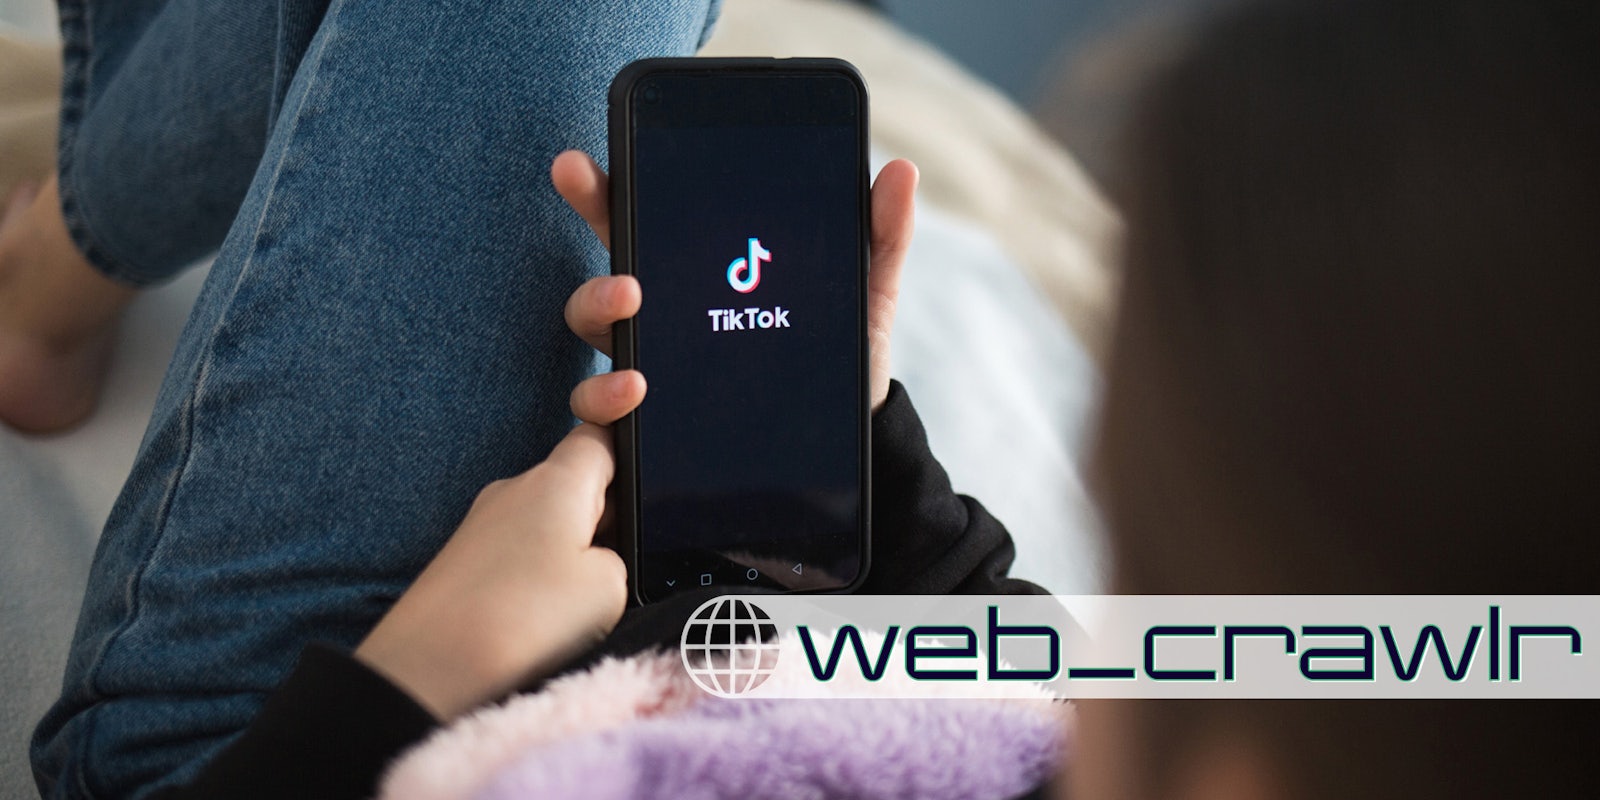 A woman holding a phone with the TikTok logo on it. In the bottom right corner is the web_crawlr Daily Dot newsletter logo.